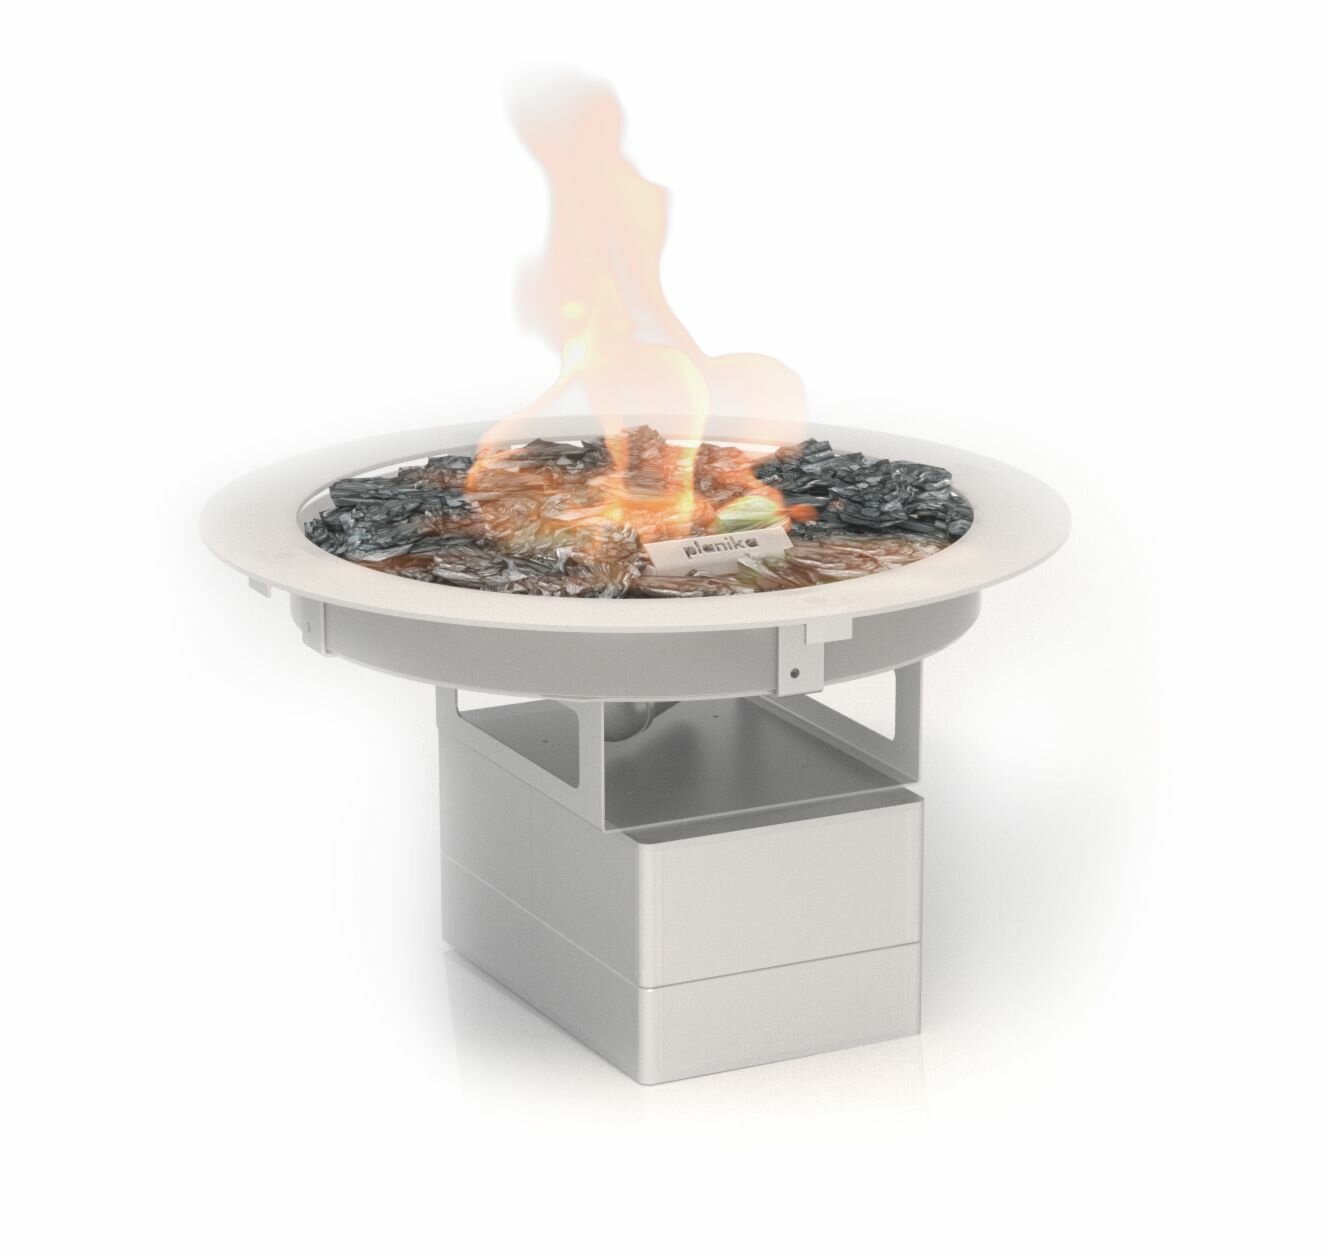 Planika Round Galio Outdoor Gas Fire, Outdoor Fire Pit Inserts